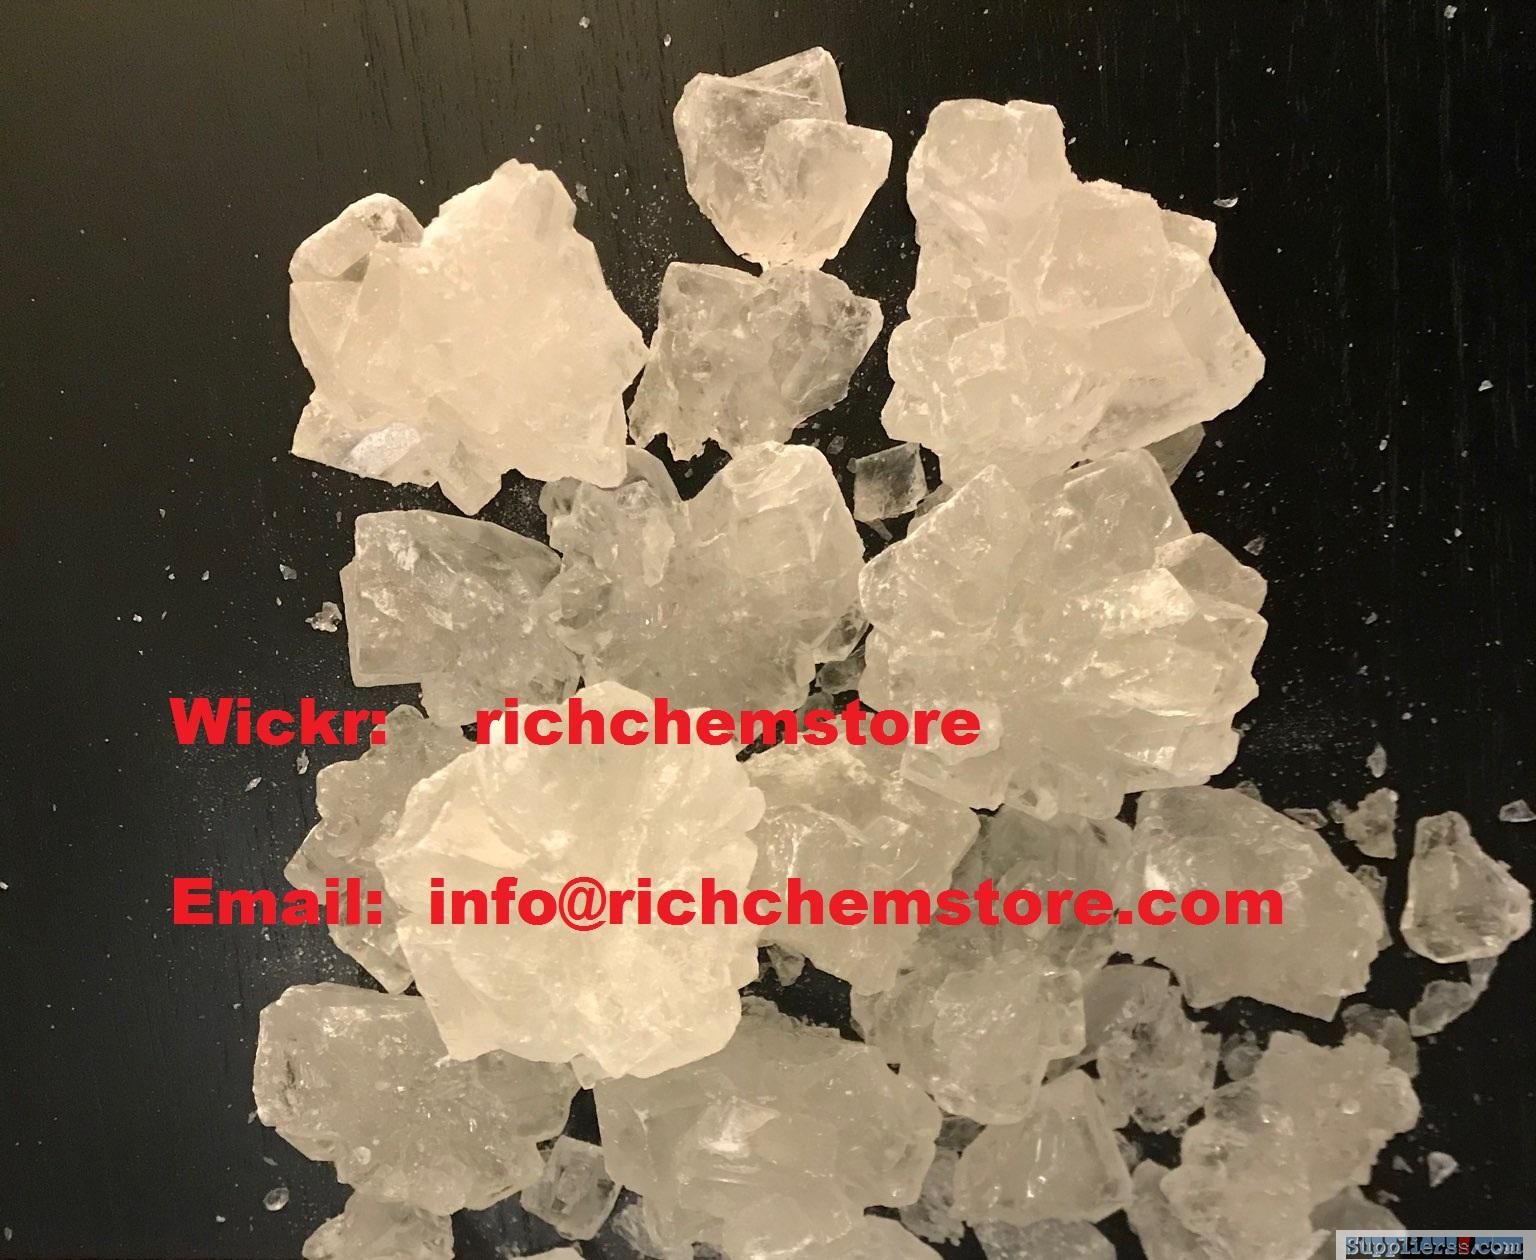 Buy Pure Uncut Carfentanil from China | (Wickr: richchemstore)